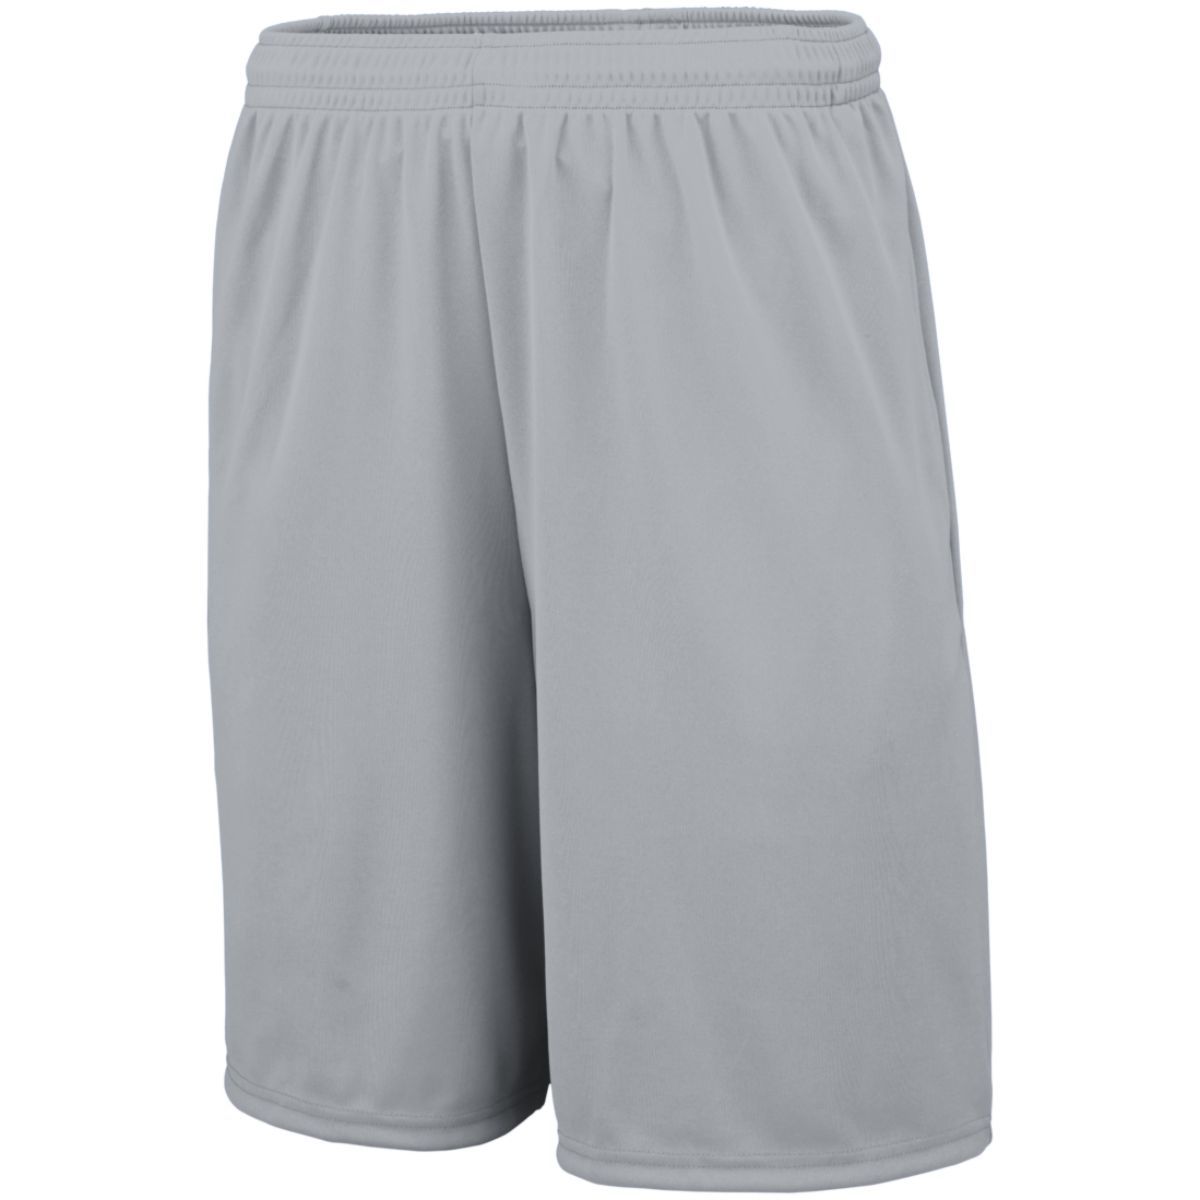 Augusta Sportswear Training Shorts With Pockets in Silver Grey  -Part of the Adult, Adult-Shorts, Augusta-Products, Lacrosse, All-Sports, All-Sports-1 product lines at KanaleyCreations.com